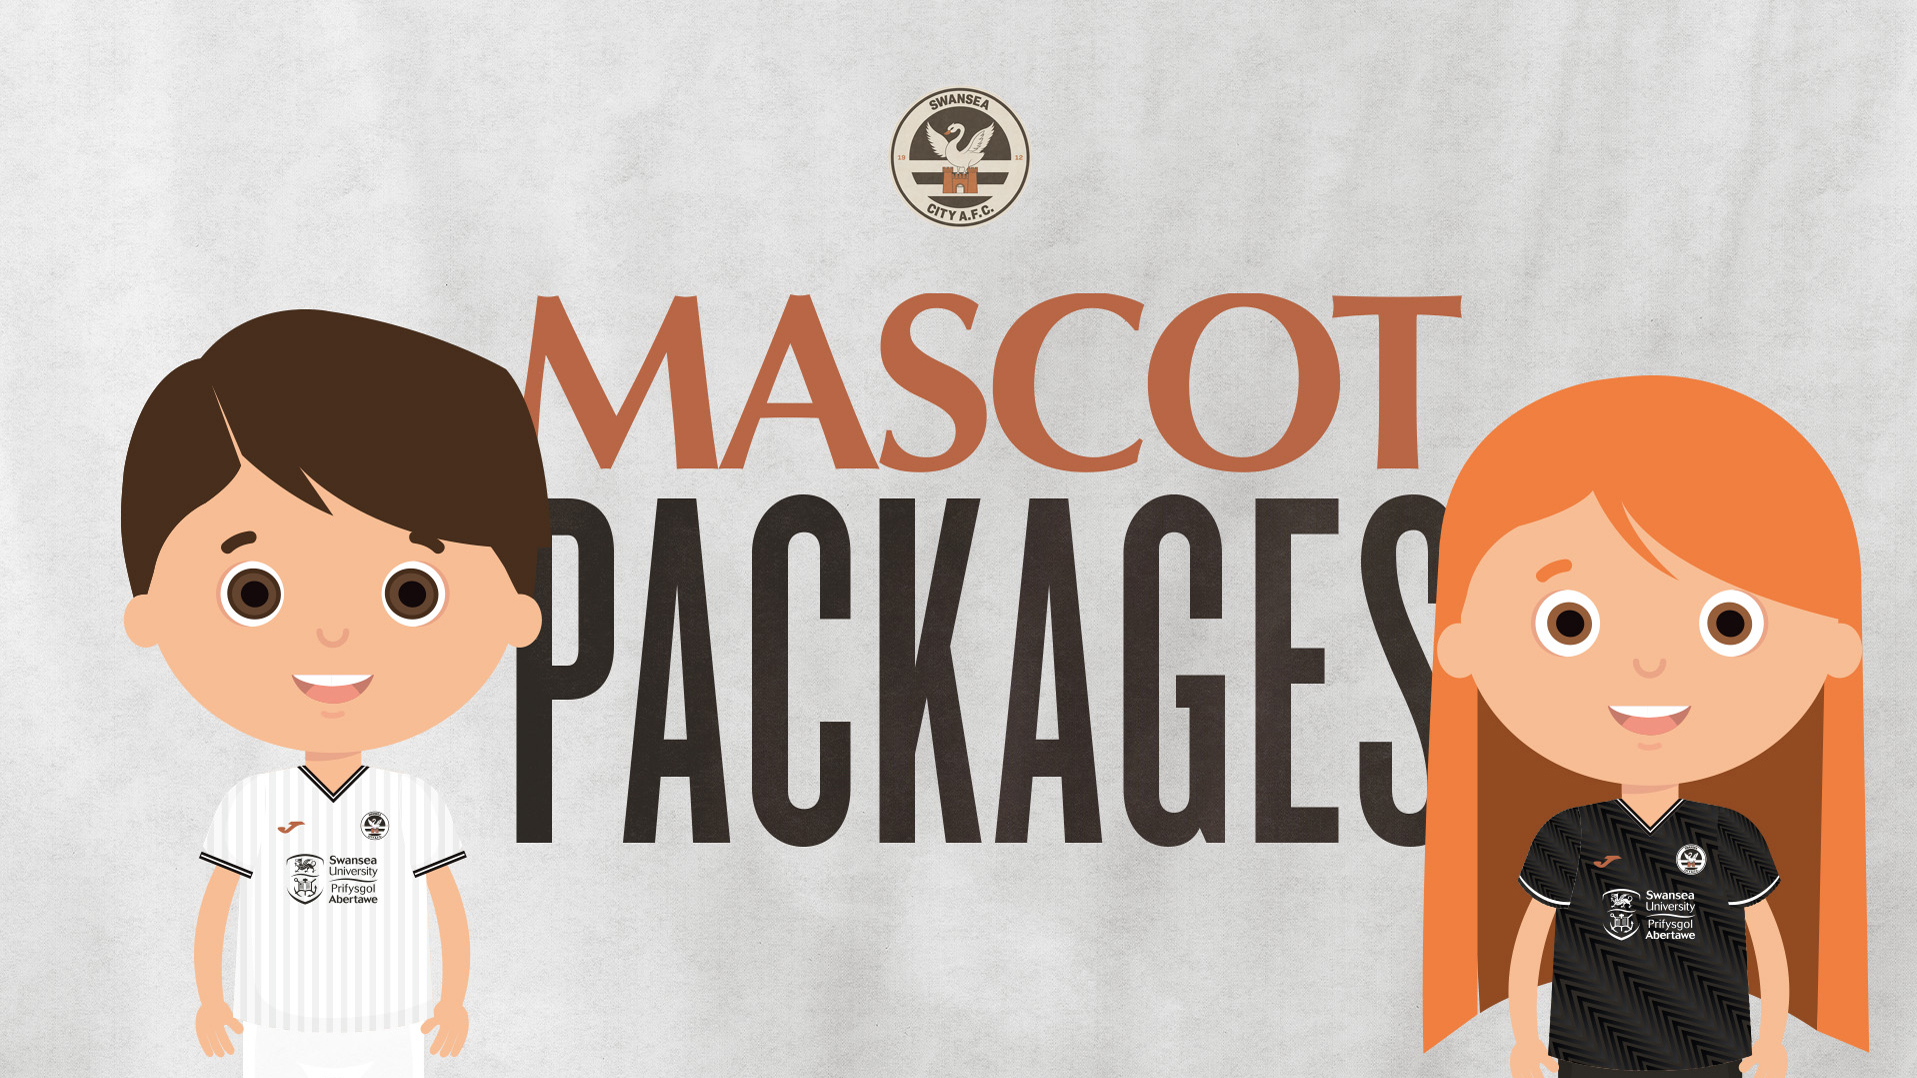 Mascot packages artwork